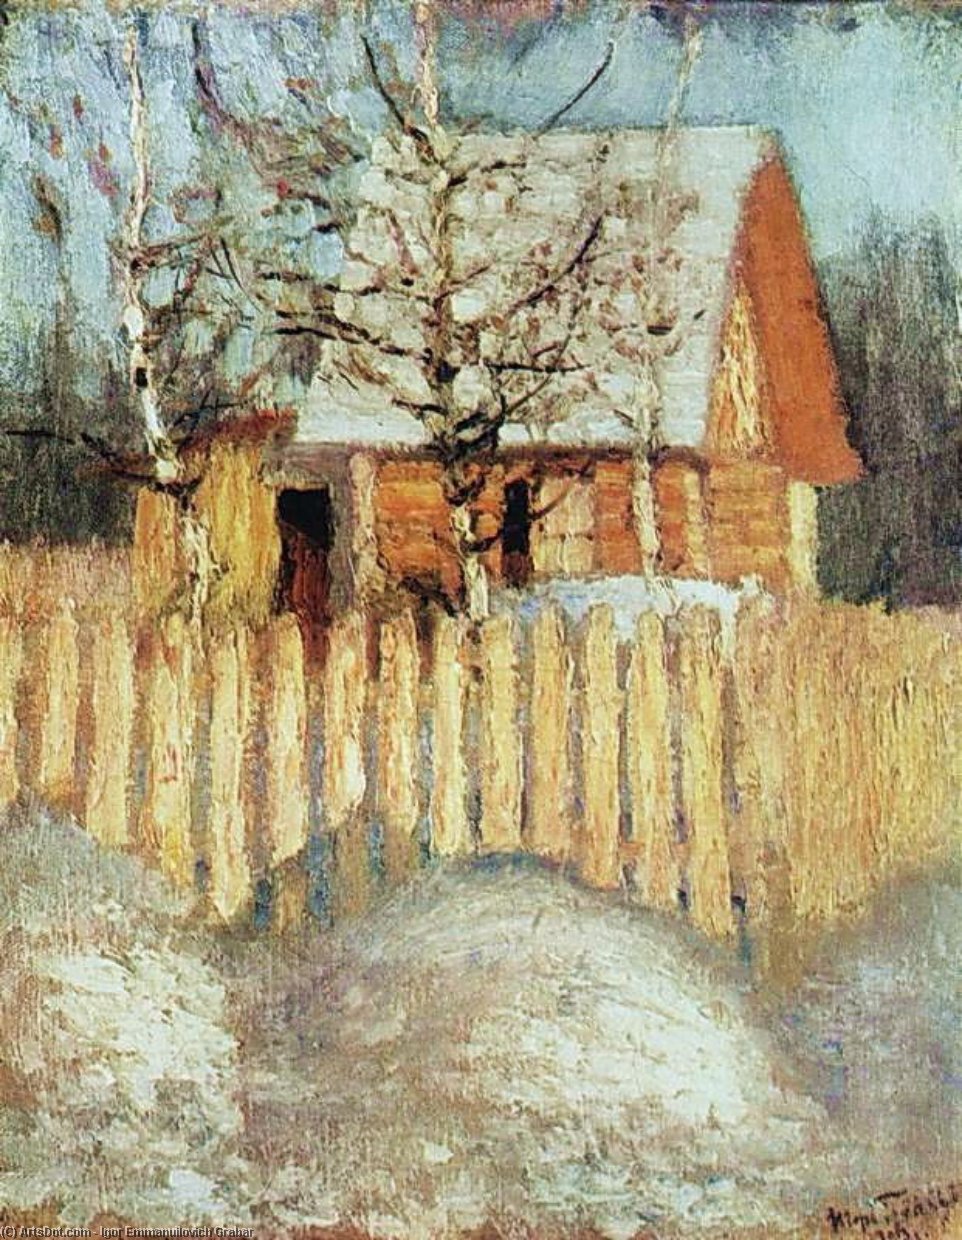 Buy Museum Art Reproductions New Summer Cottage, 1903 by Igor Emmanuilovich Grabar (Inspired By) (1871-1960, Hungary) | ArtsDot.com